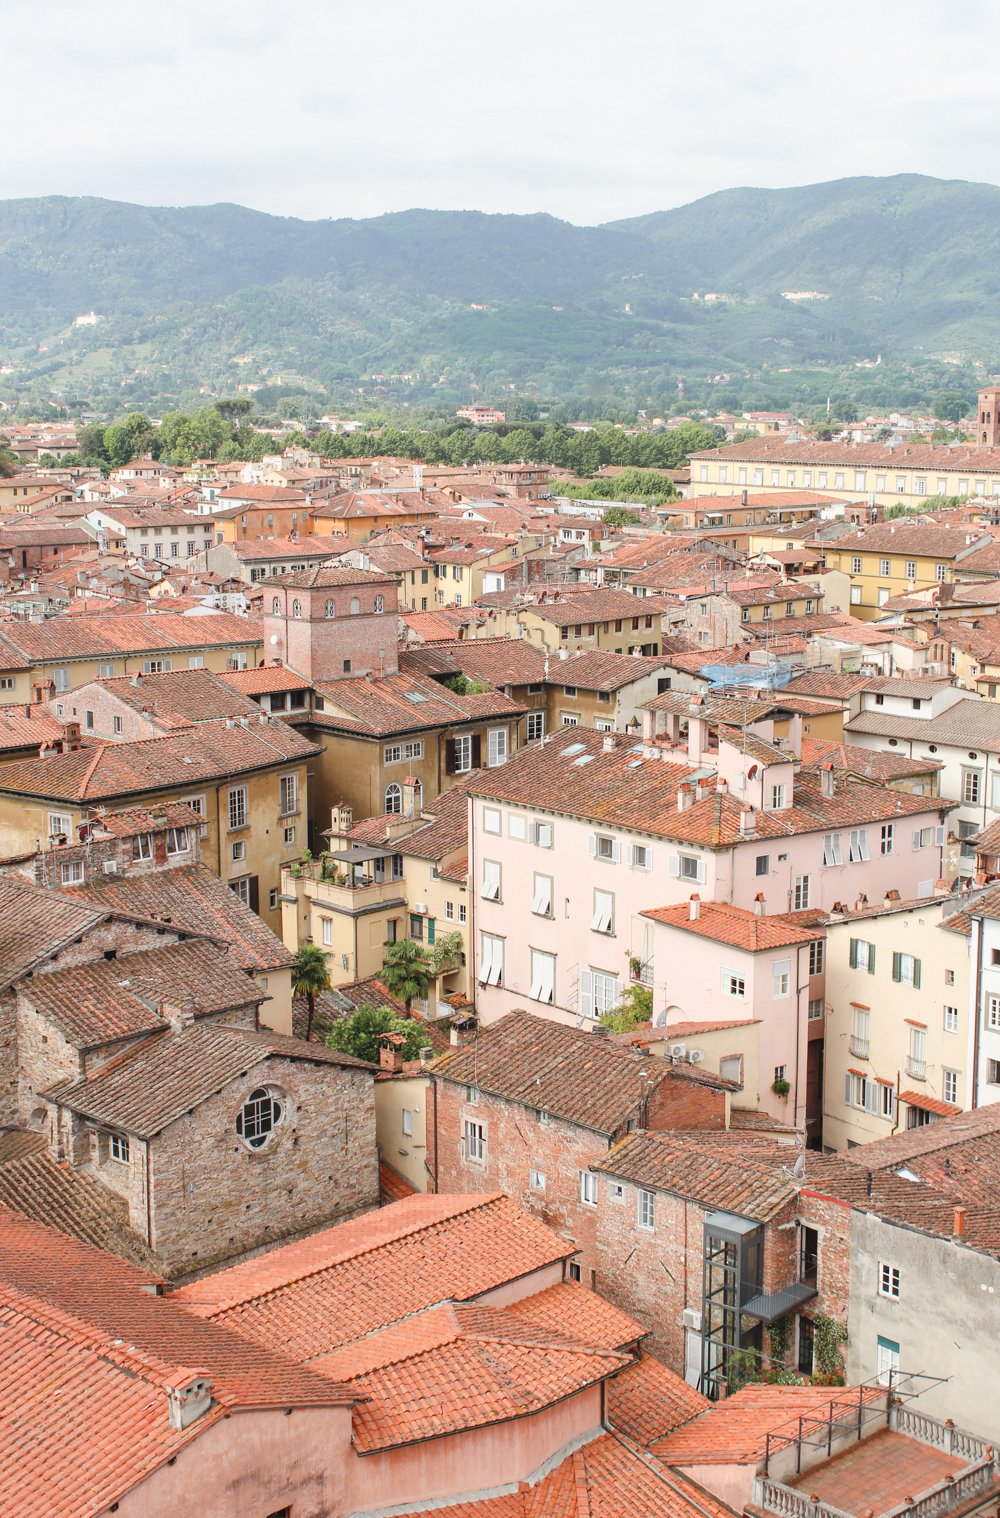 View in Lucca, Tuscany